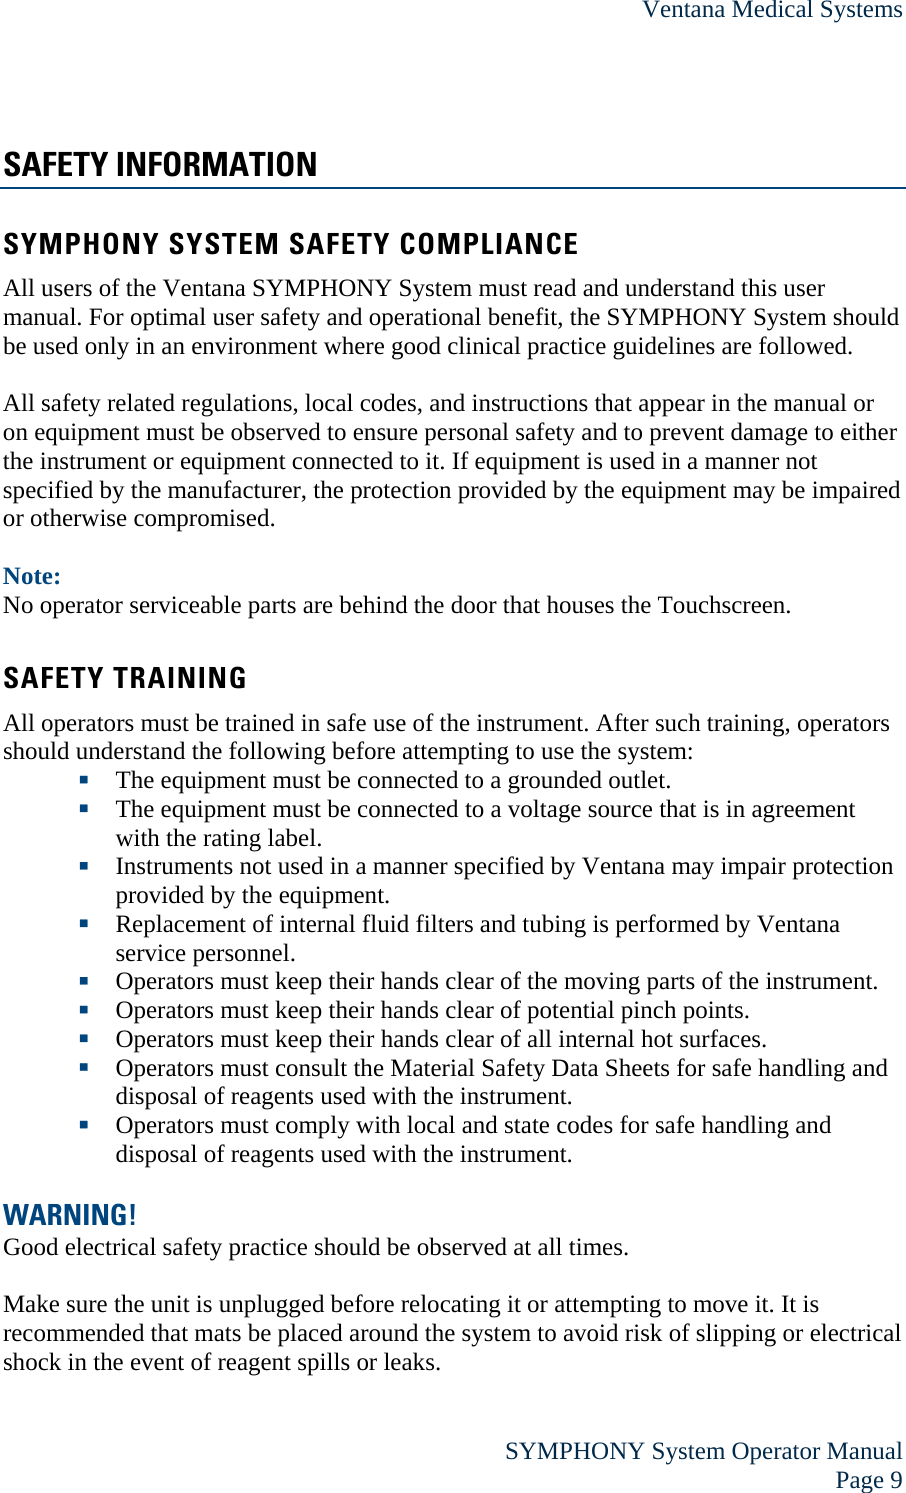 Ventana Medical Systems  SYMPHONY System Operator Manual Page 9 SAFETY INFORMATION SYMPHONY SYSTEM SAFETY COMPLIANCE All users of the Ventana SYMPHONY System must read and understand this user manual. For optimal user safety and operational benefit, the SYMPHONY System should be used only in an environment where good clinical practice guidelines are followed.  All safety related regulations, local codes, and instructions that appear in the manual or on equipment must be observed to ensure personal safety and to prevent damage to either the instrument or equipment connected to it. If equipment is used in a manner not specified by the manufacturer, the protection provided by the equipment may be impaired or otherwise compromised.  Note: No operator serviceable parts are behind the door that houses the Touchscreen.  SAFETY TRAINING All operators must be trained in safe use of the instrument. After such training, operators should understand the following before attempting to use the system:  The equipment must be connected to a grounded outlet.  The equipment must be connected to a voltage source that is in agreement with the rating label.  Instruments not used in a manner specified by Ventana may impair protection provided by the equipment.  Replacement of internal fluid filters and tubing is performed by Ventana service personnel.  Operators must keep their hands clear of the moving parts of the instrument.  Operators must keep their hands clear of potential pinch points.  Operators must keep their hands clear of all internal hot surfaces.  Operators must consult the Material Safety Data Sheets for safe handling and disposal of reagents used with the instrument.  Operators must comply with local and state codes for safe handling and disposal of reagents used with the instrument.  WARNING! Good electrical safety practice should be observed at all times.  Make sure the unit is unplugged before relocating it or attempting to move it. It is recommended that mats be placed around the system to avoid risk of slipping or electrical shock in the event of reagent spills or leaks.  